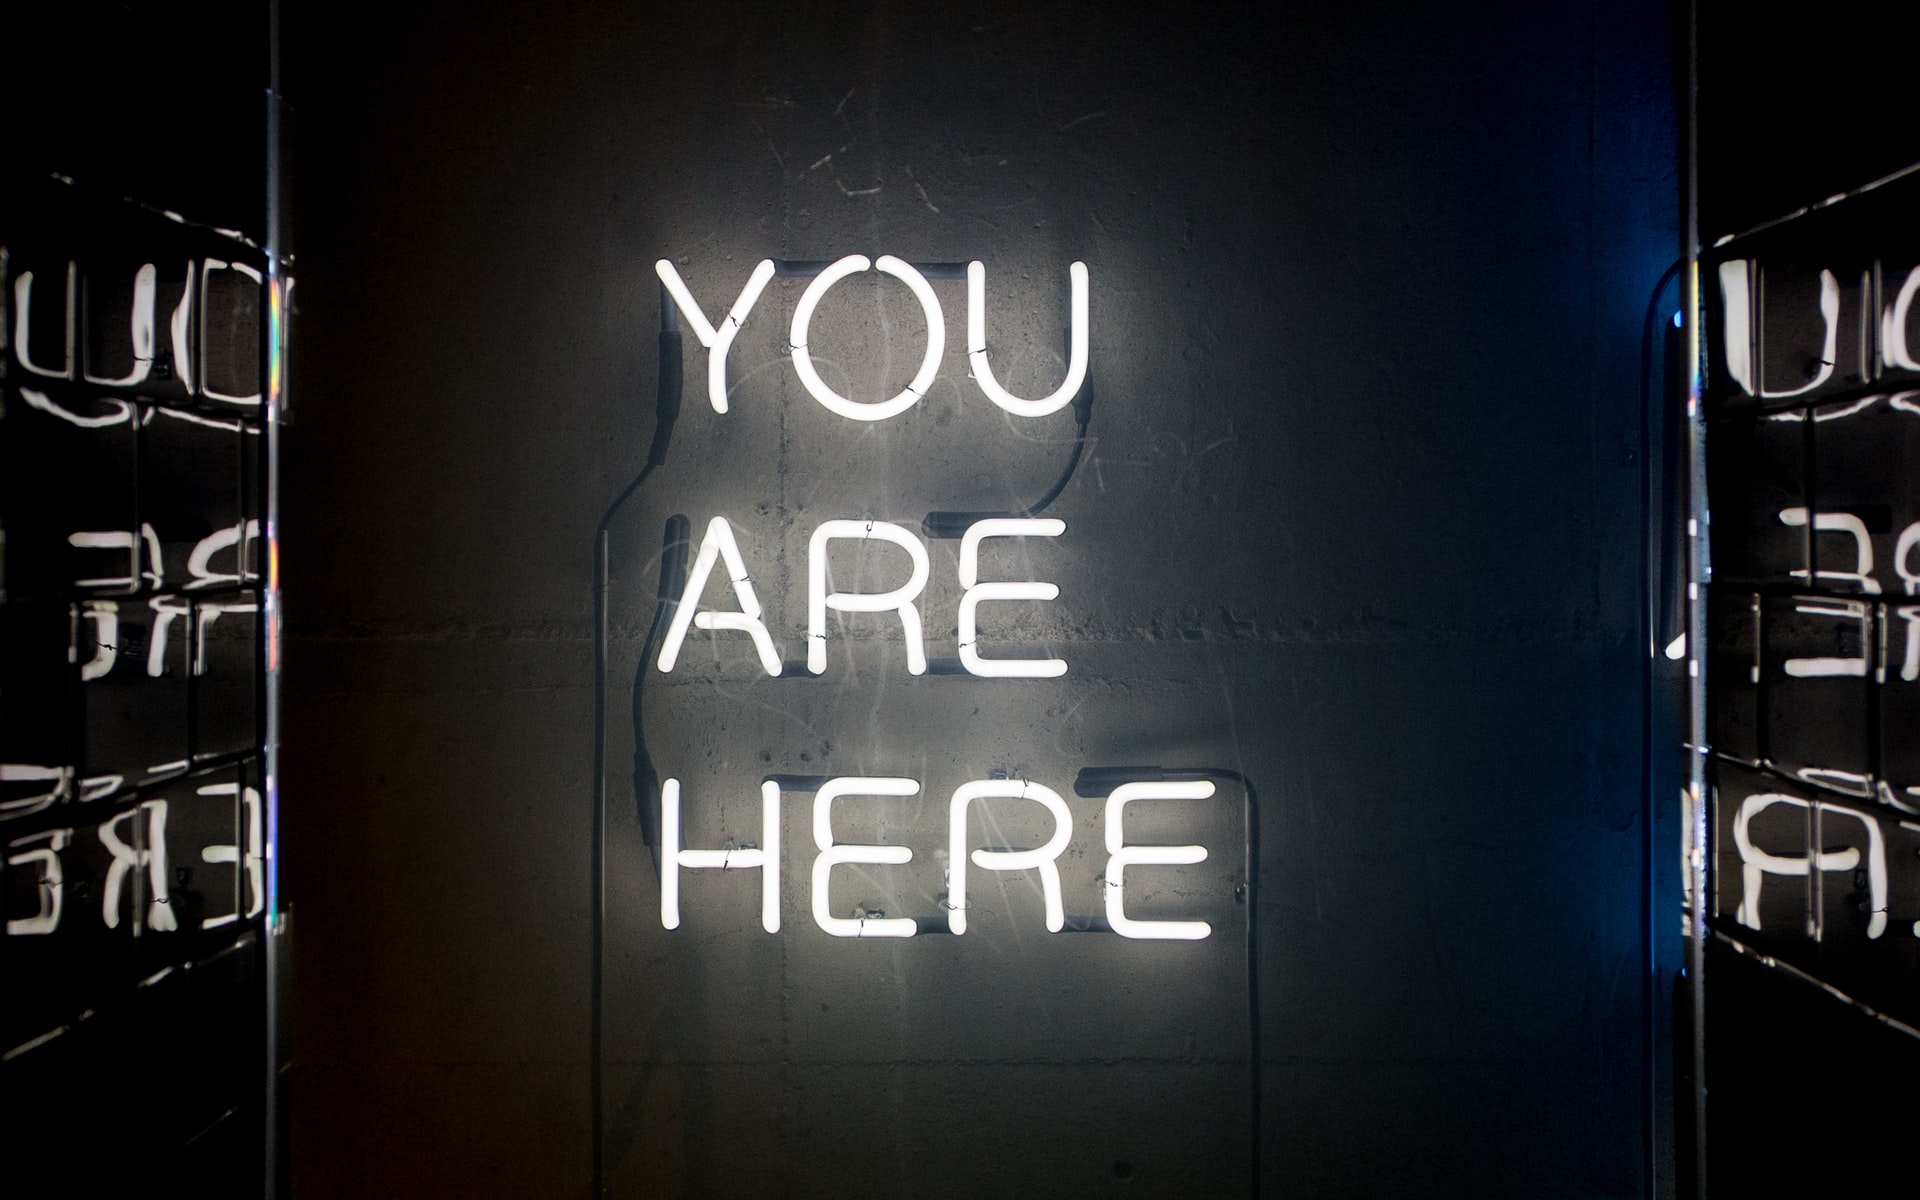 'You are here' in white neon lights